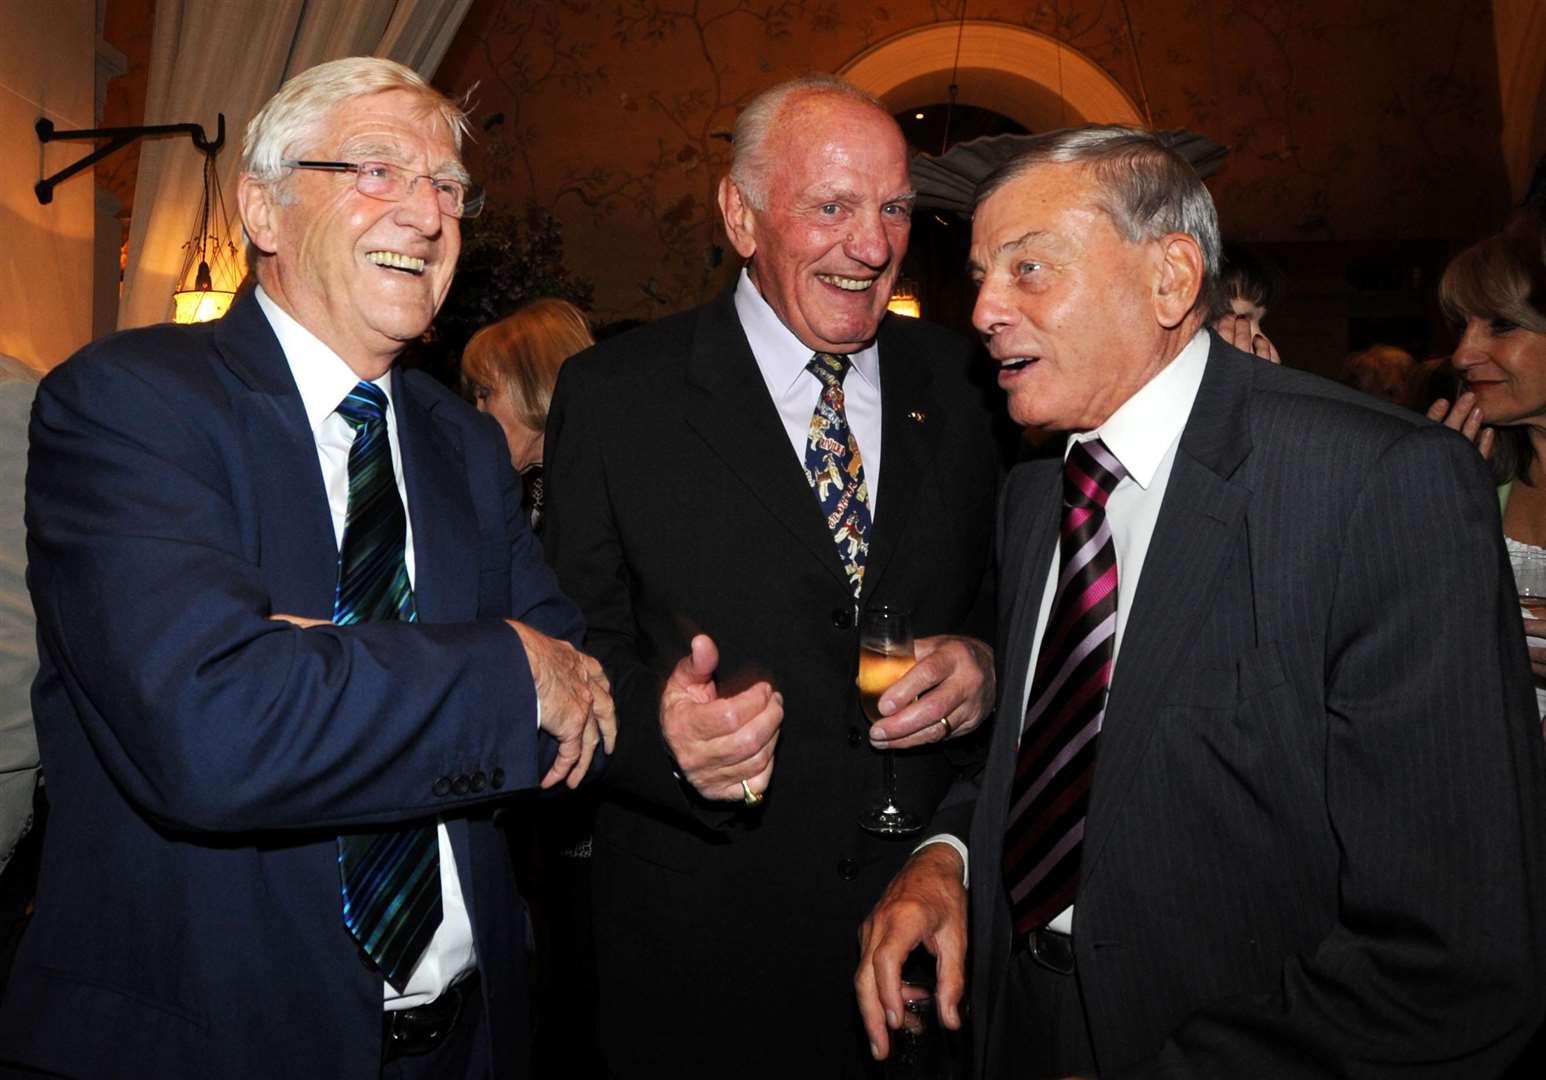 Sir Michael with Sir Henry Cooper and Dickie Bird at a party to celebrate the publication of his autobiography in 2008 (PA)